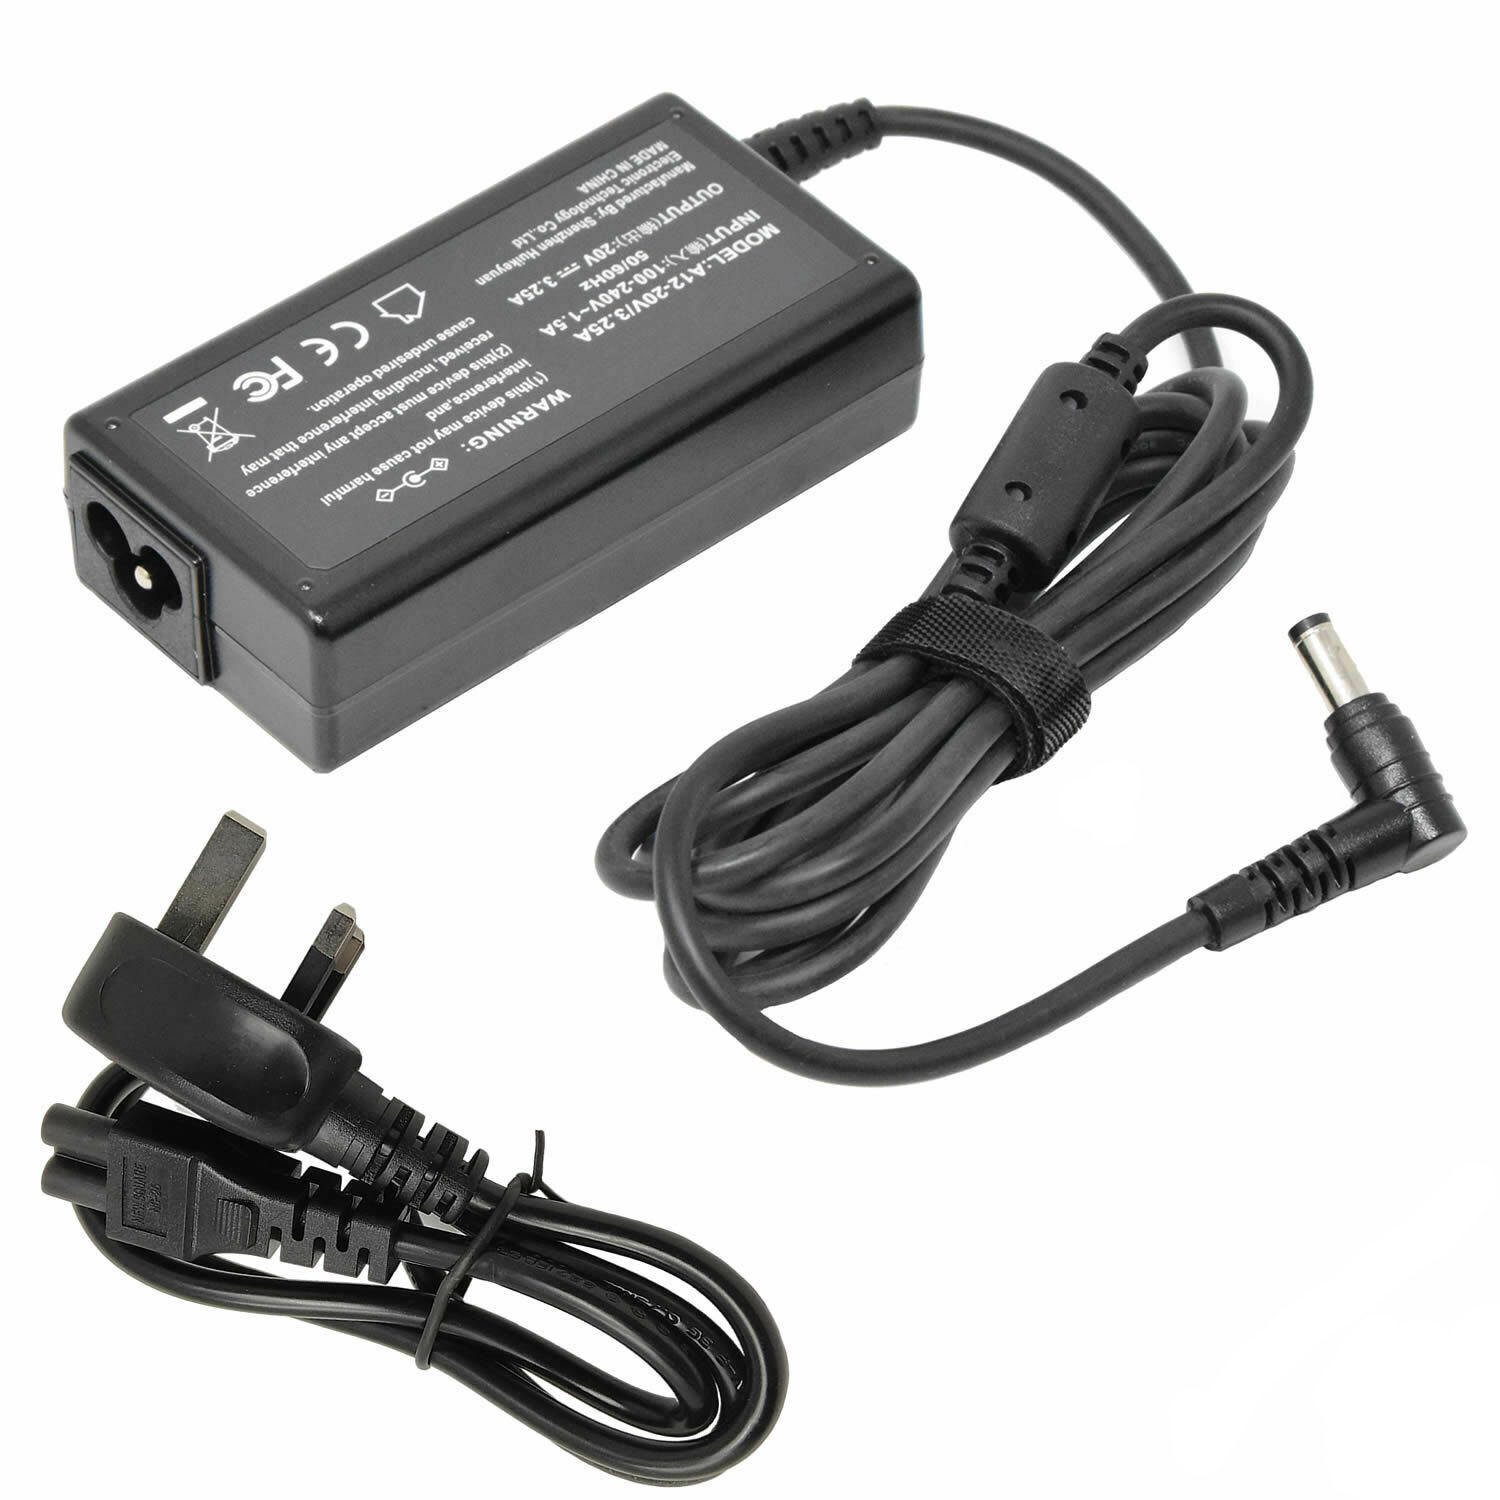 Lenovo G475 Power Adapter Laptop Charger